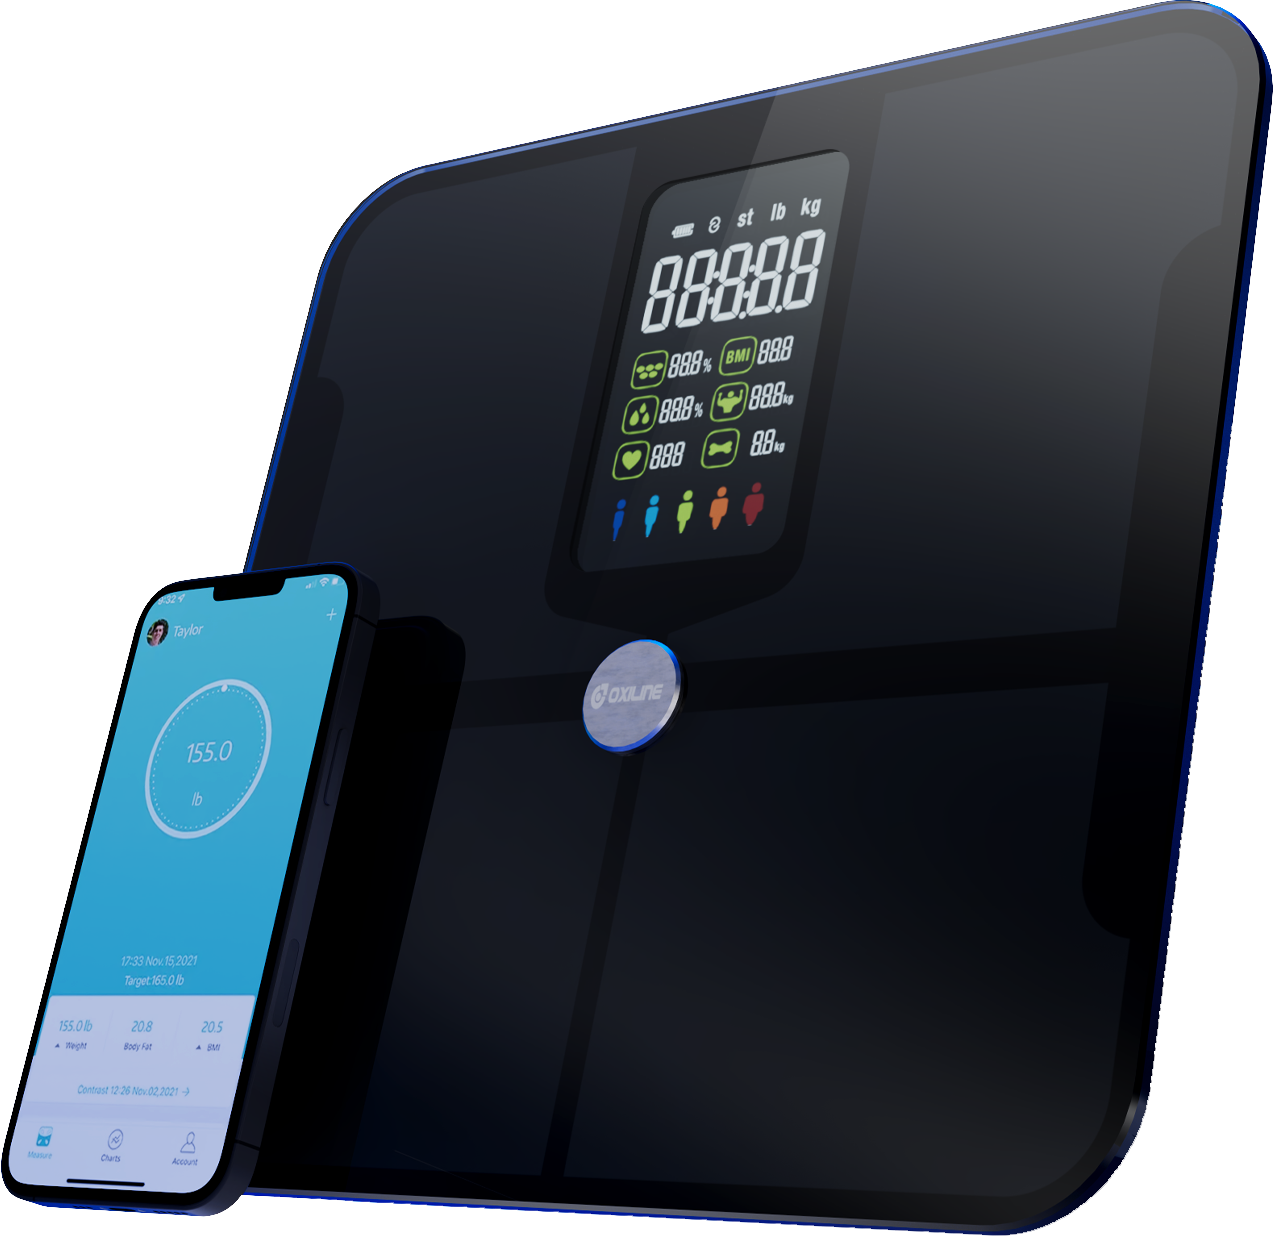 A sleek and modern smart scale with a floating display, measuring weight and body composition metrics such as body fat percentage and muscle mass.